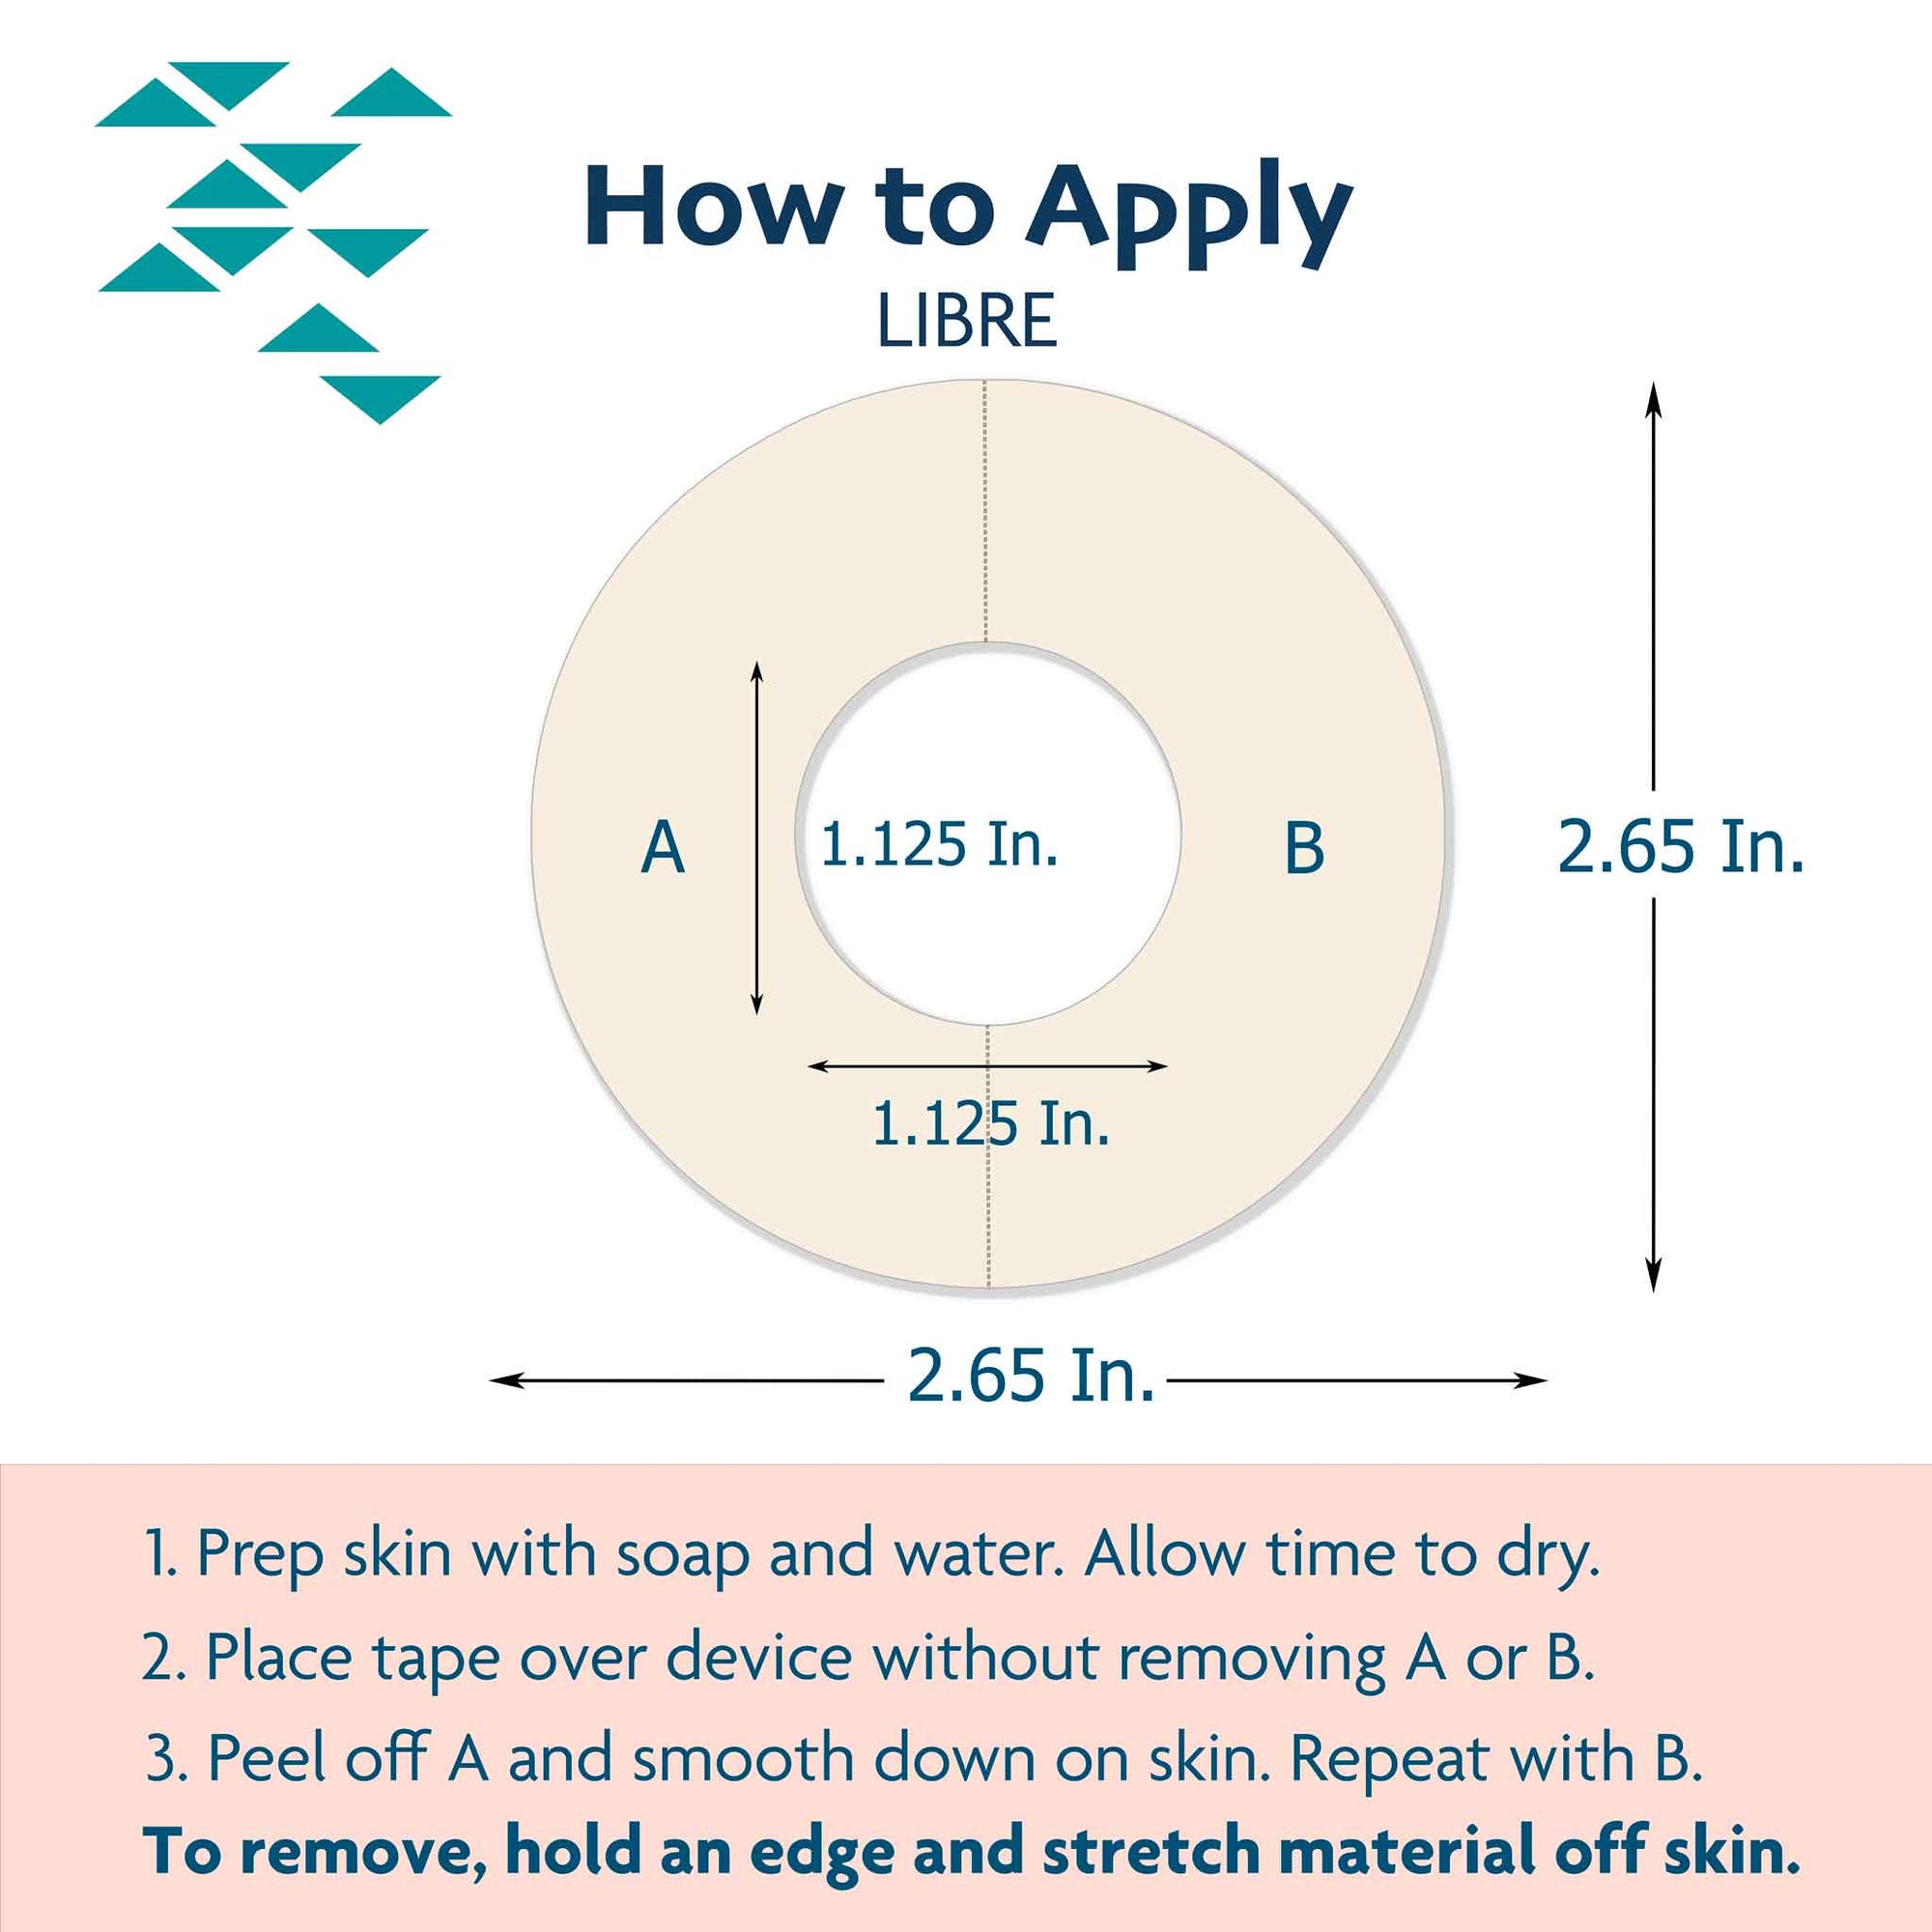 ExpressionMed Libre Adhesive tapes application instructions